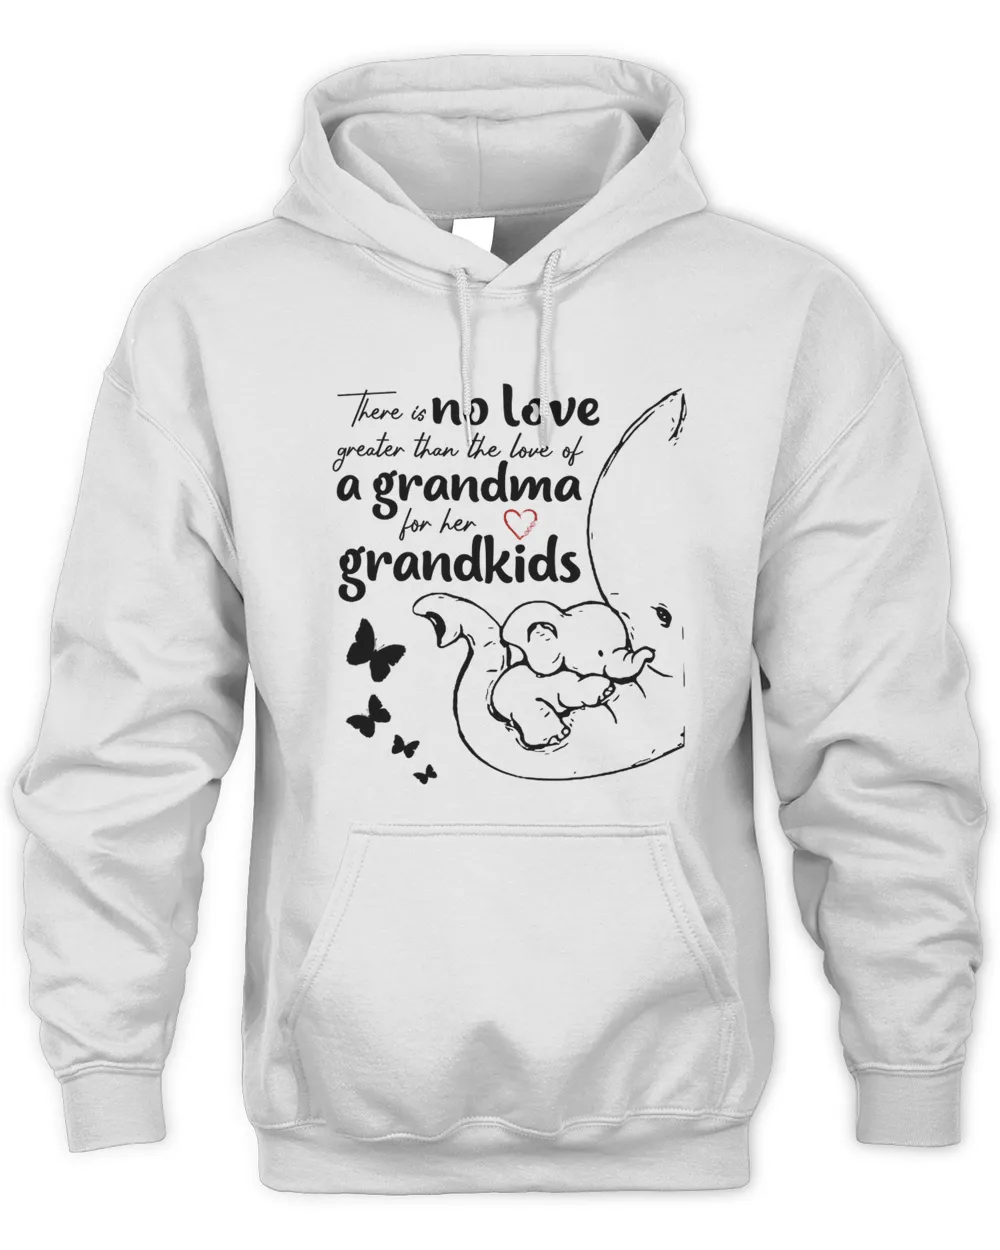 There is no love greater than the love of a grandma for her grandkids